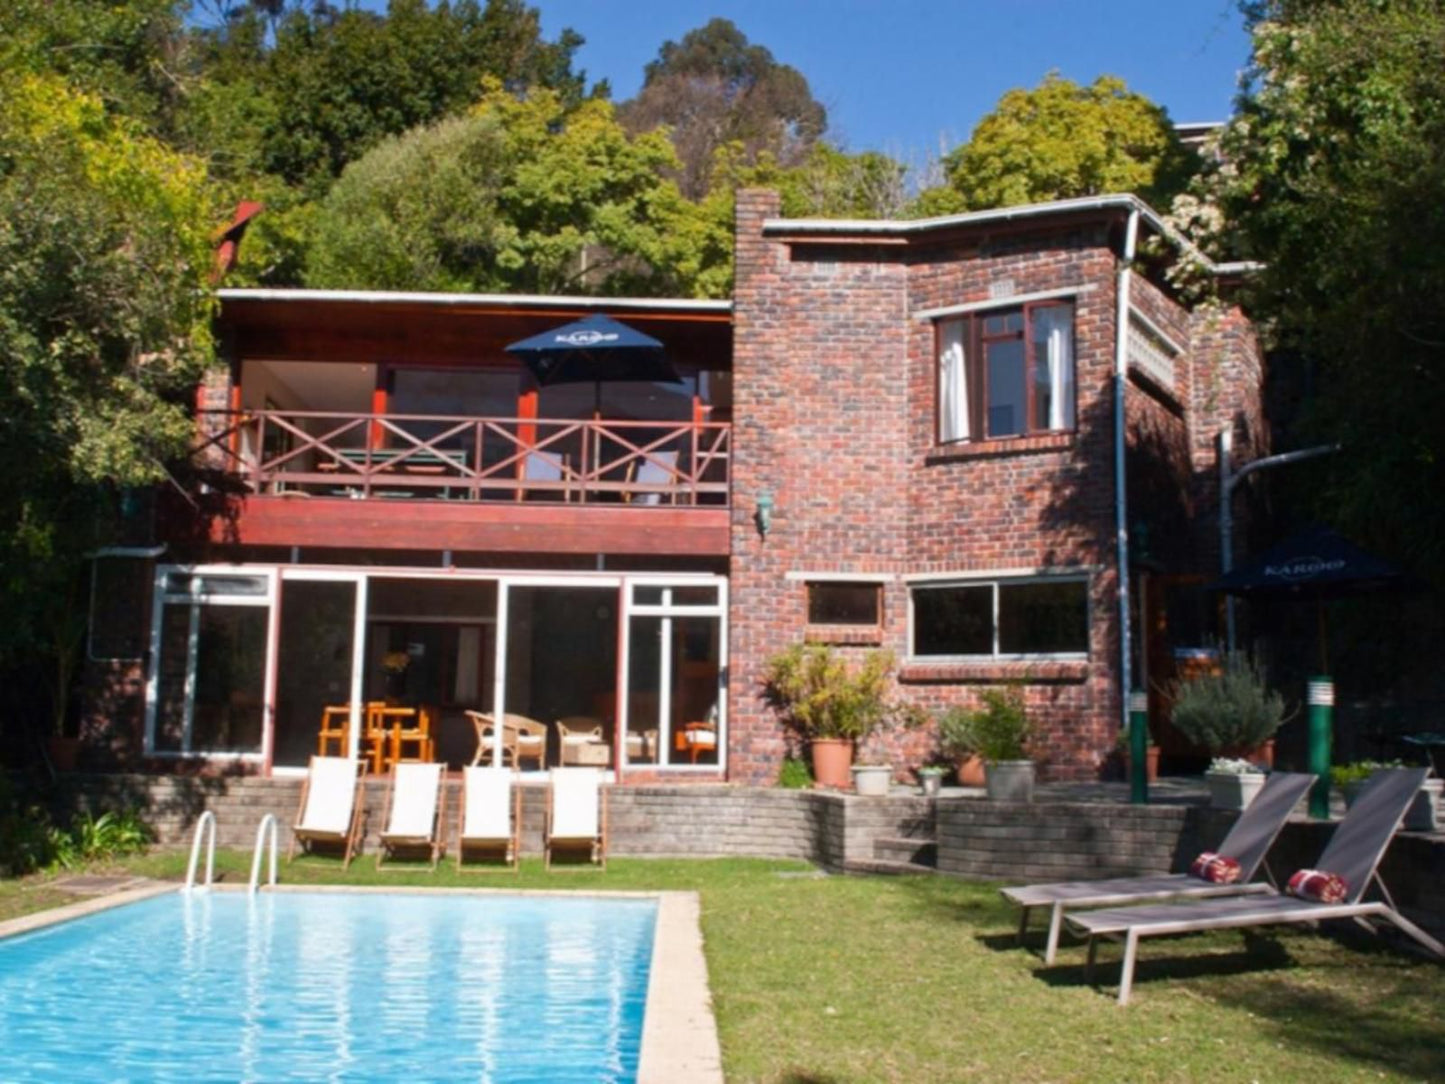 Phantom Acres Hout Bay Cape Town Western Cape South Africa House, Building, Architecture, Swimming Pool